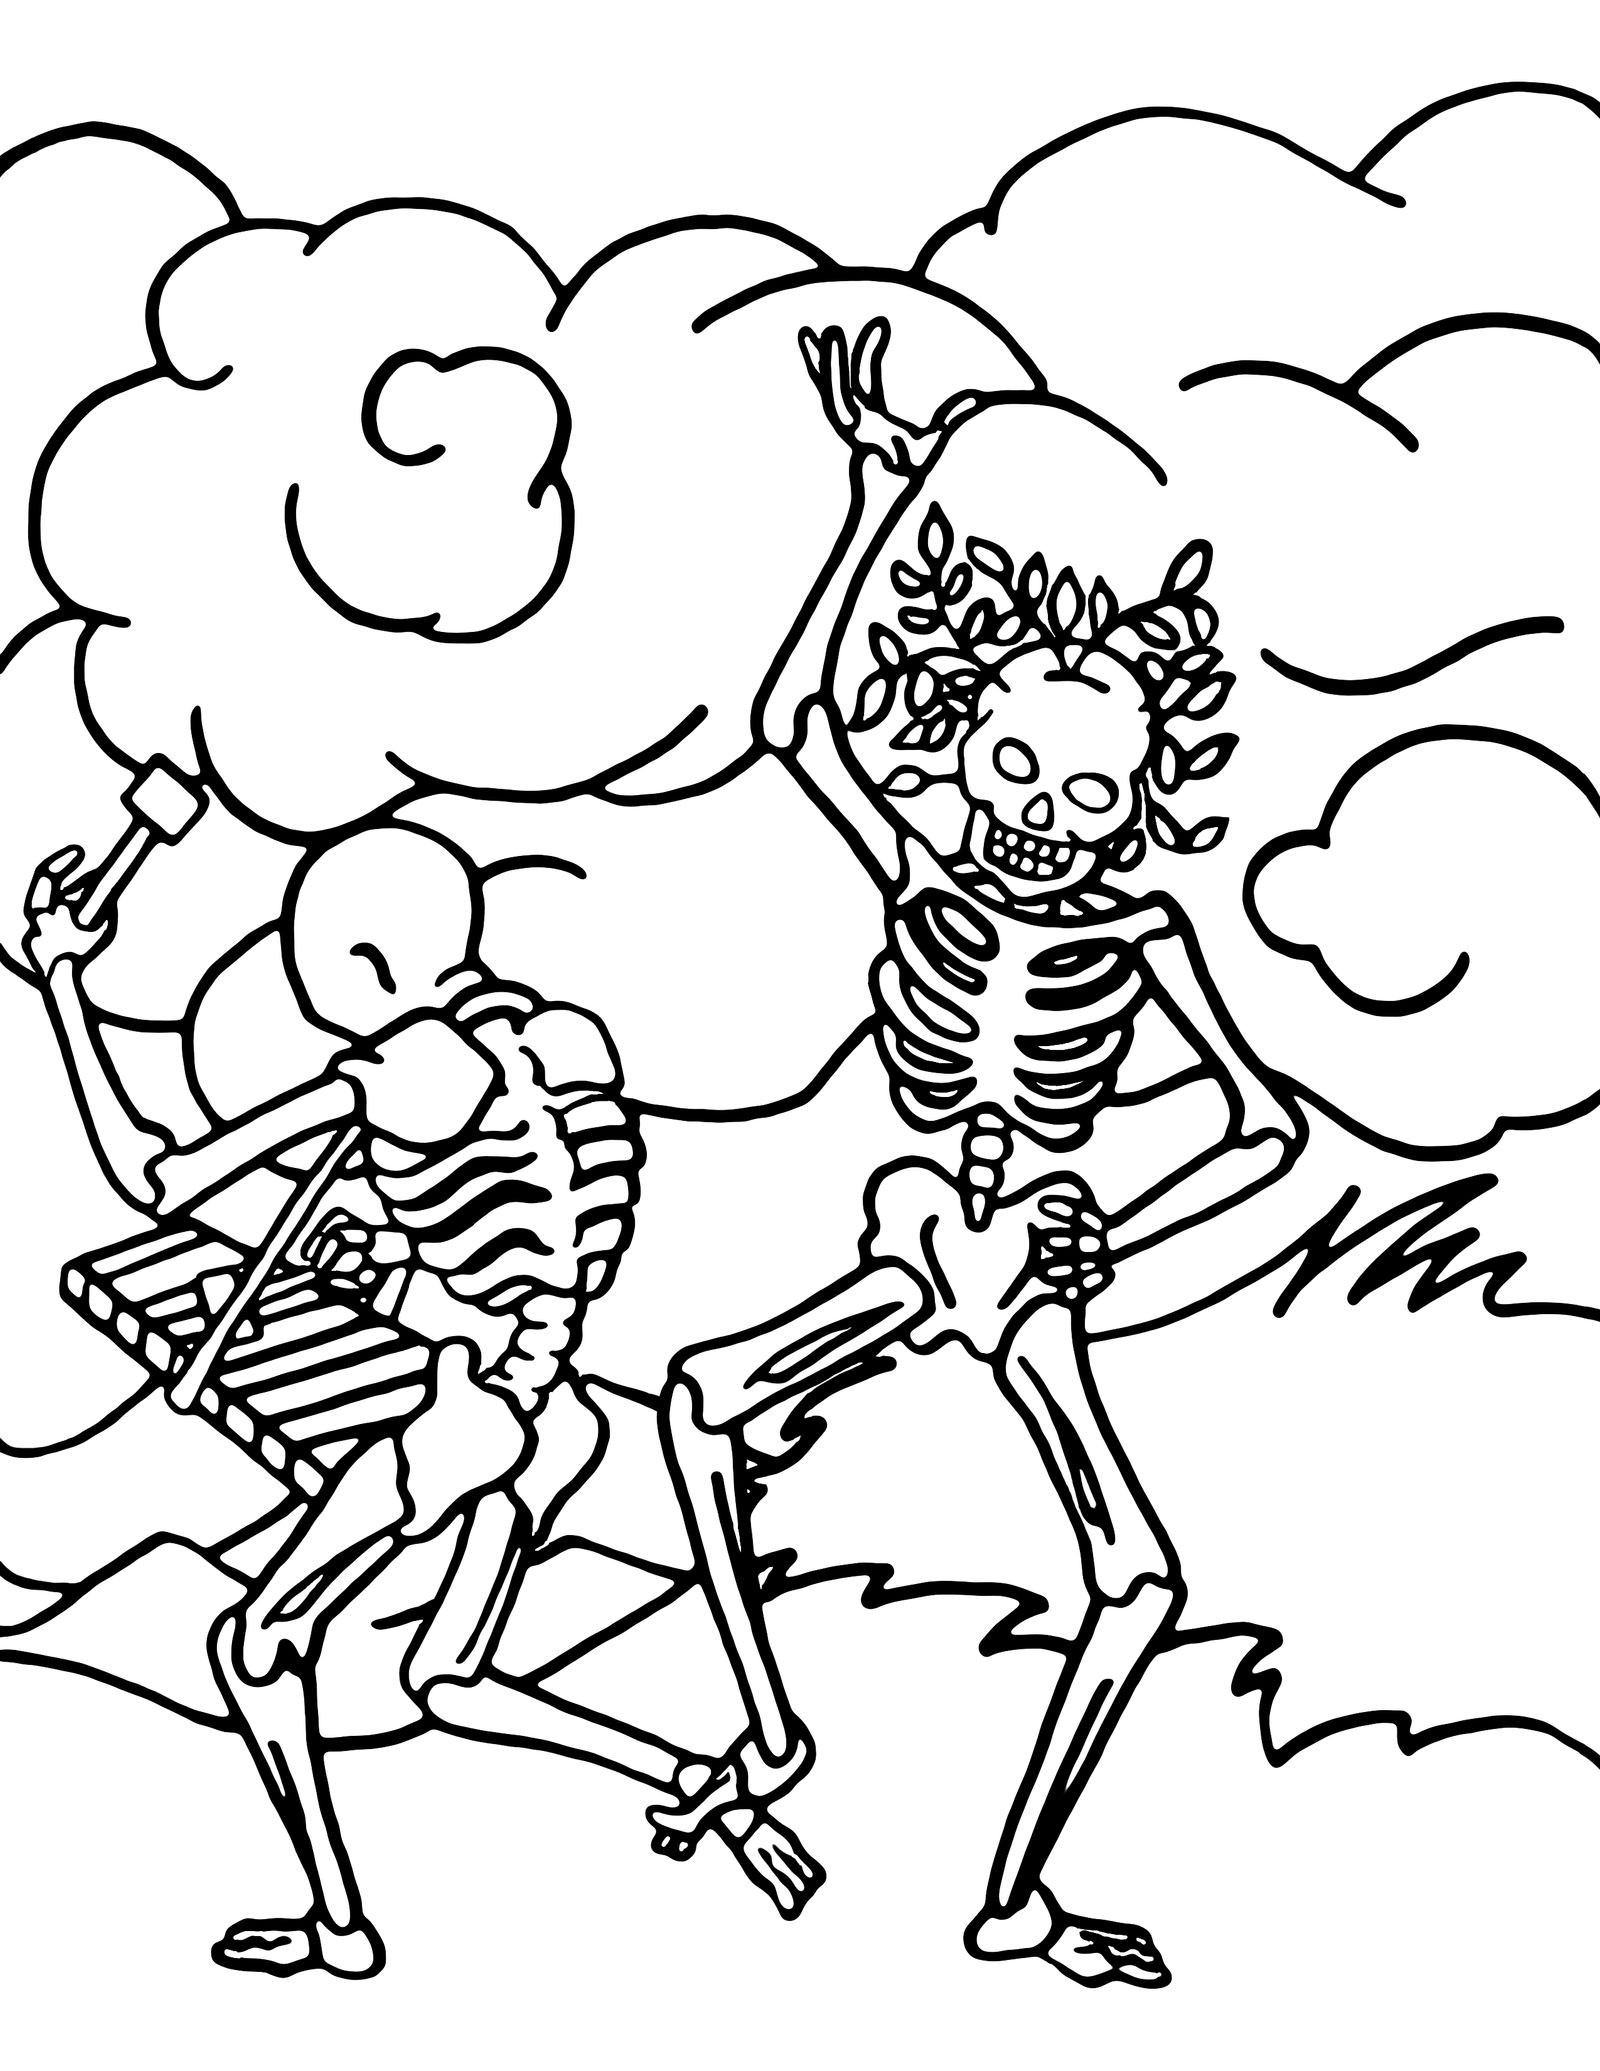 Dance with death coloring page by cetivarose on